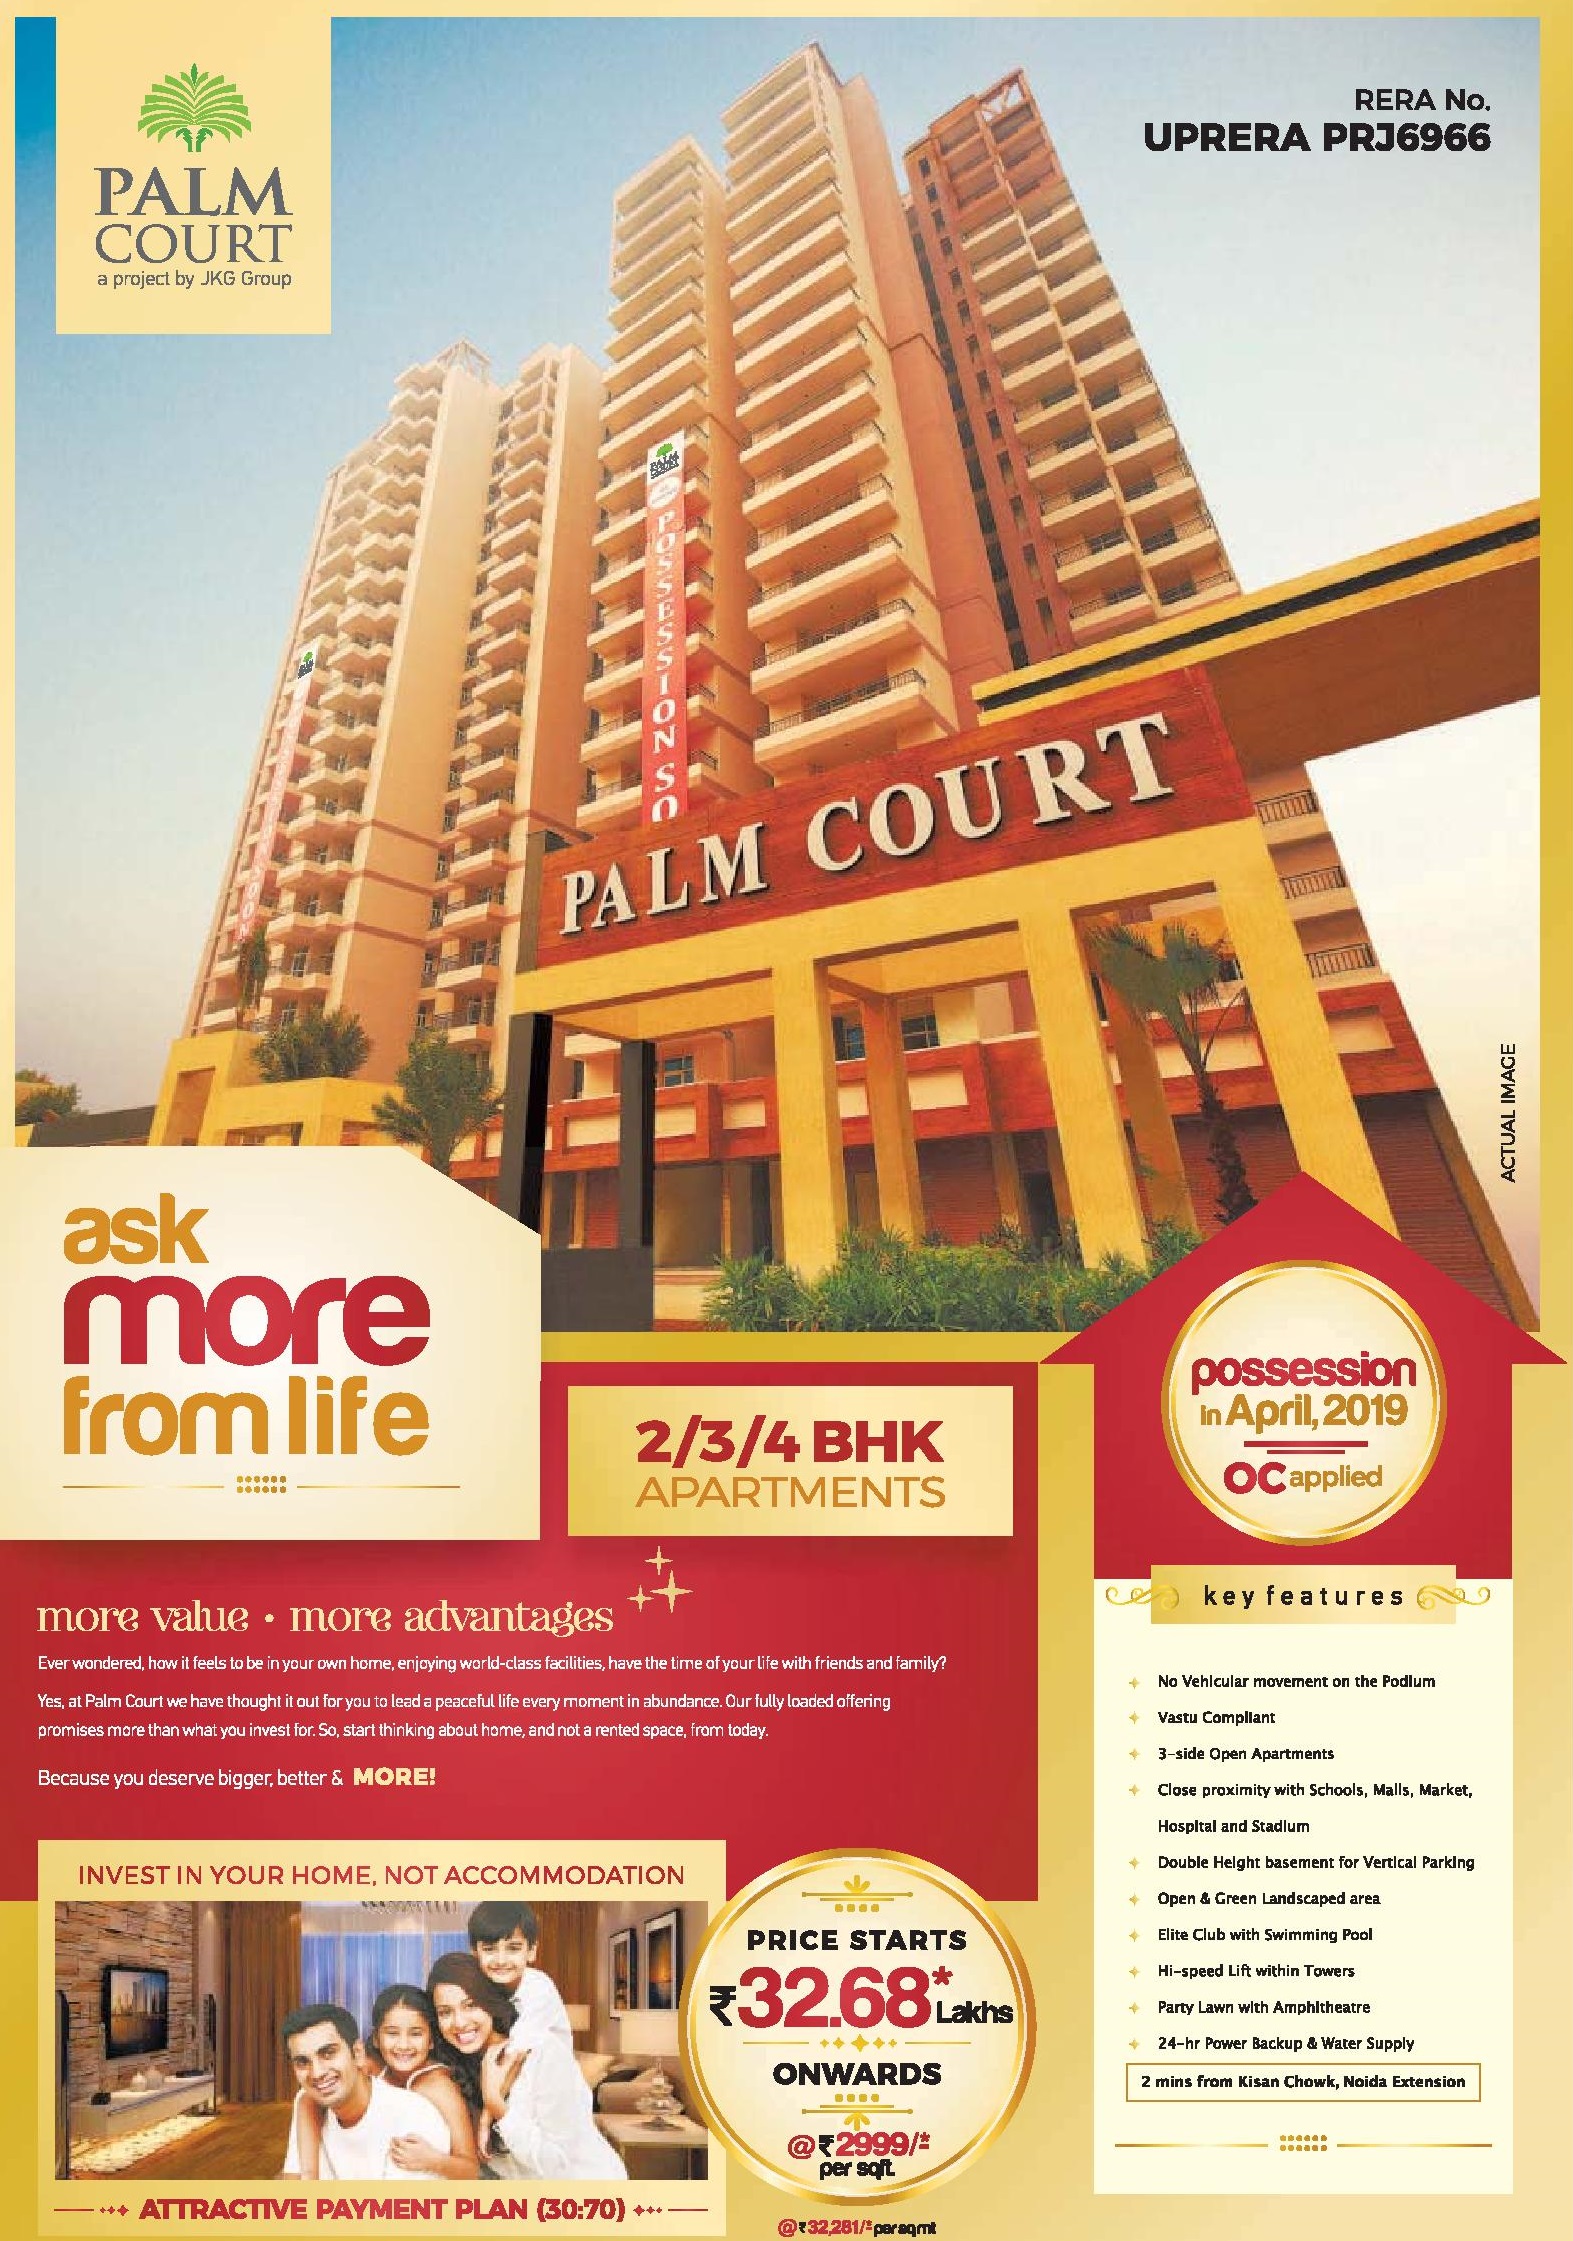 Book home @ Rs 2999 per sqft at JKG Palm Court in Greater Noida Update